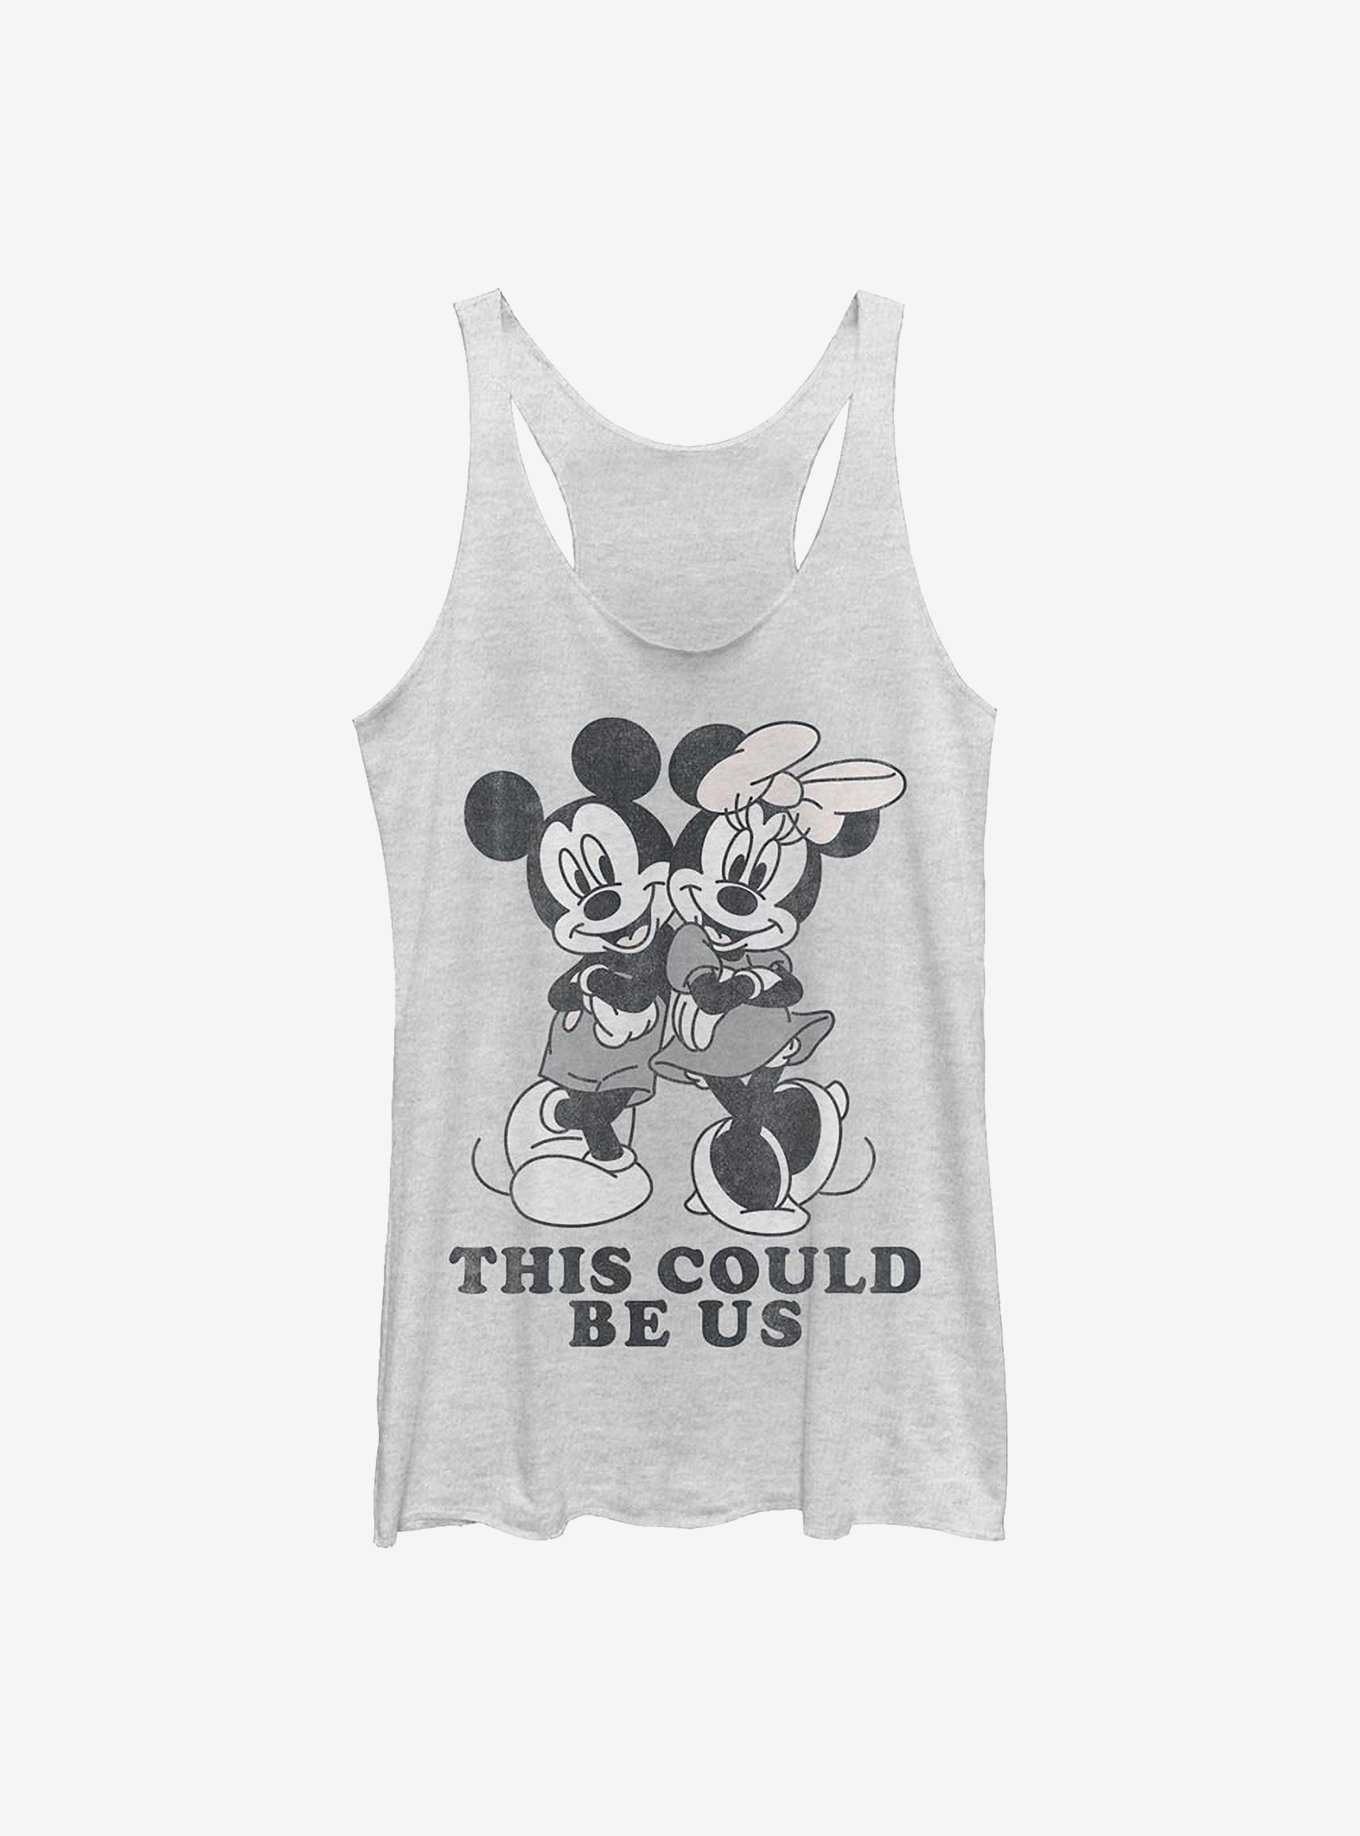 Disney Mickey Mouse Could Be Us Girls Tank, , hi-res